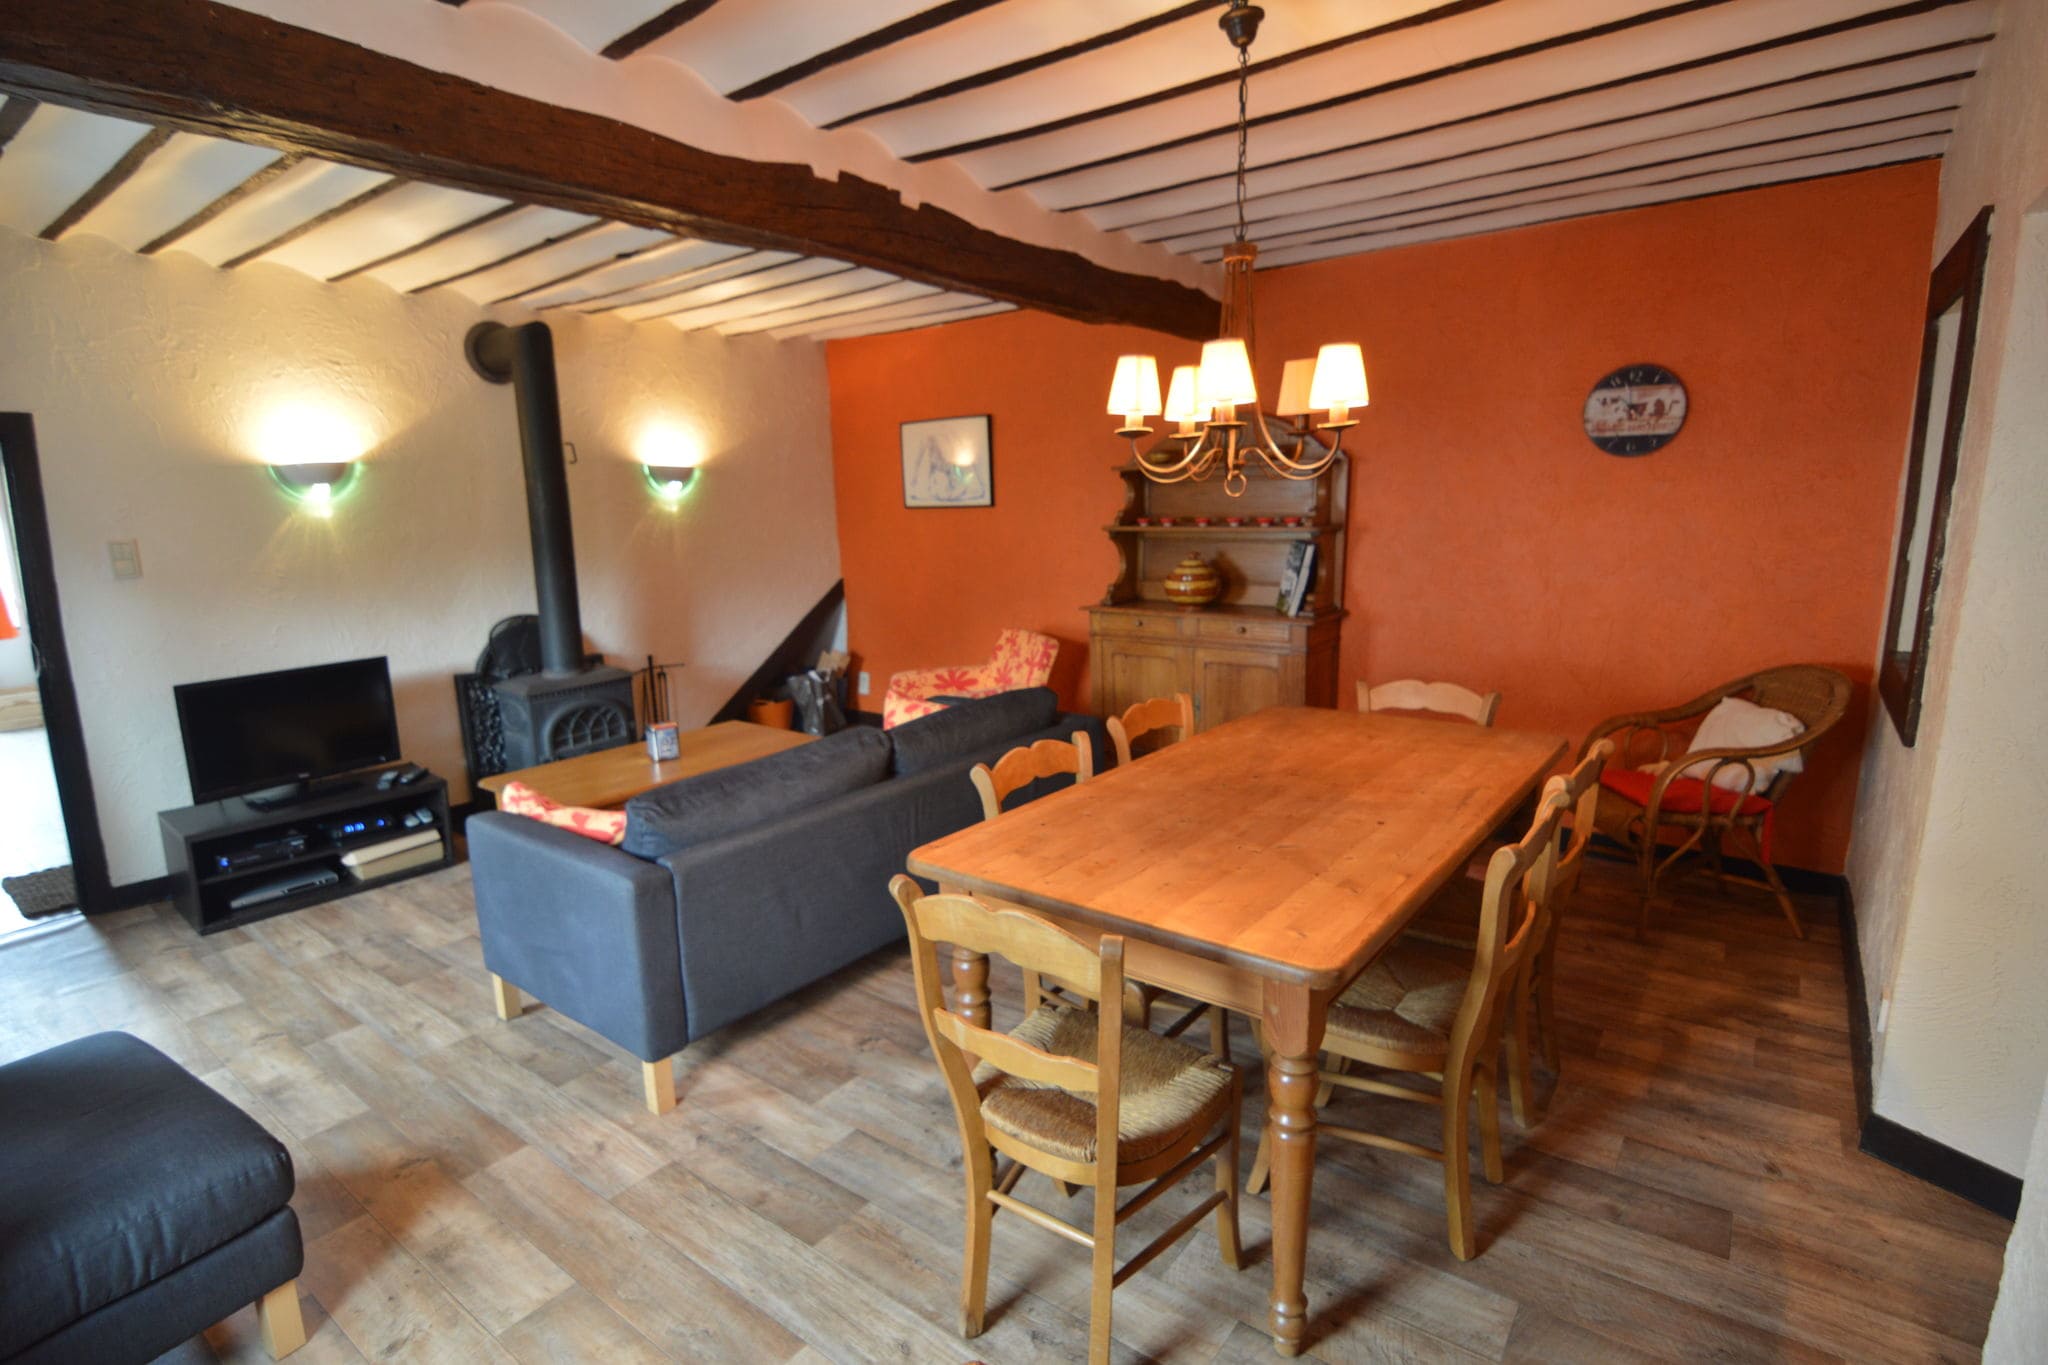 Holiday house in a horse riding school, close to Stavelot and Spa circuit